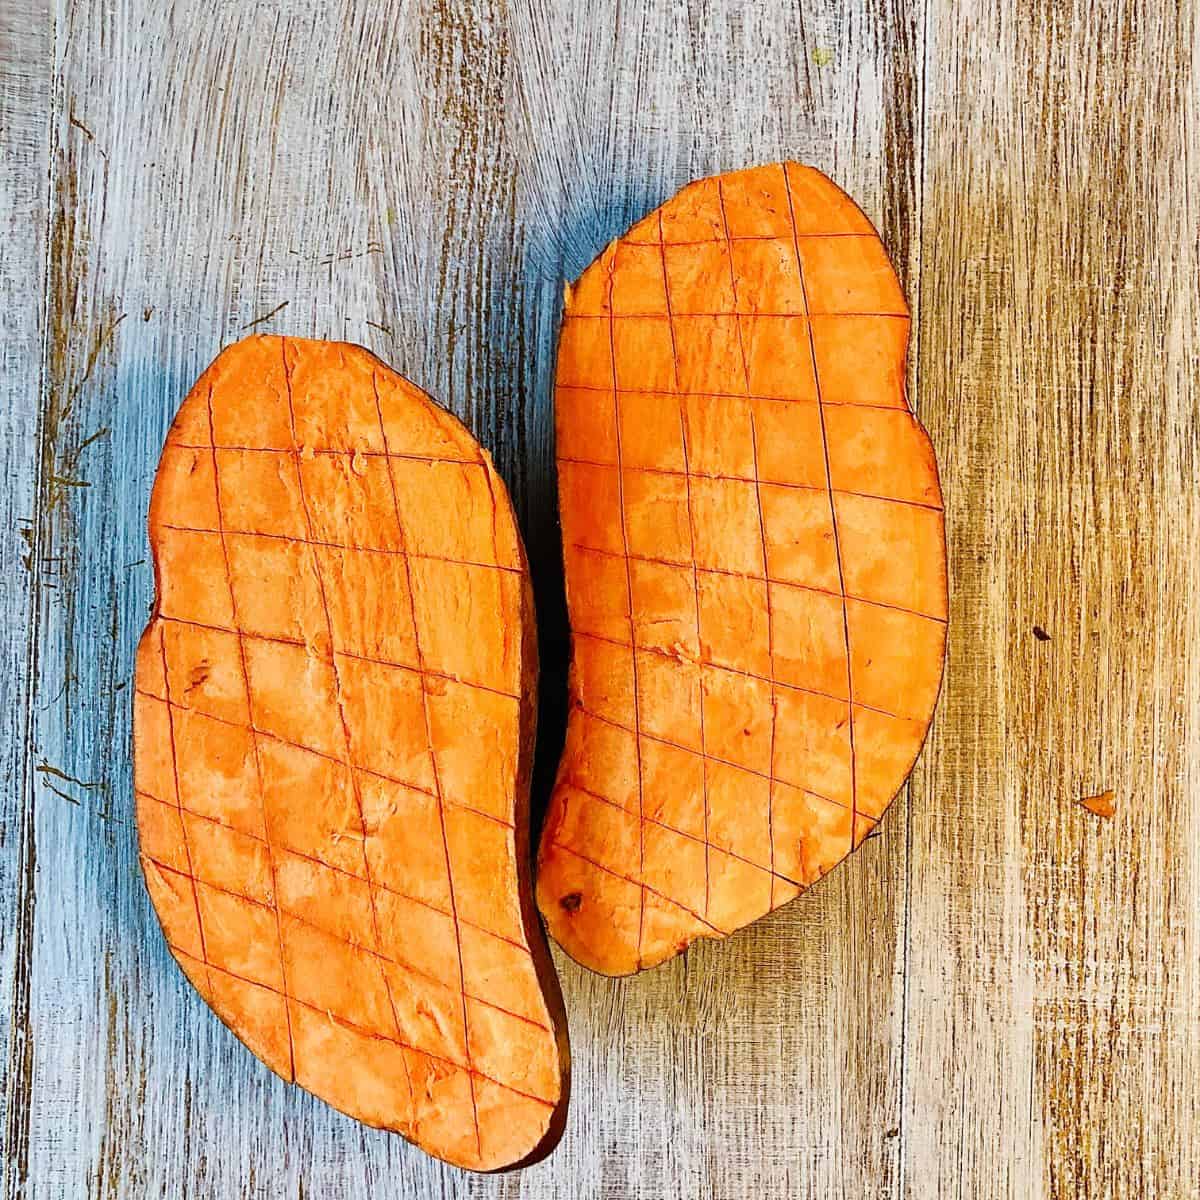 Sweet potato cut in half lengthwise and scored vertically and horizontally.